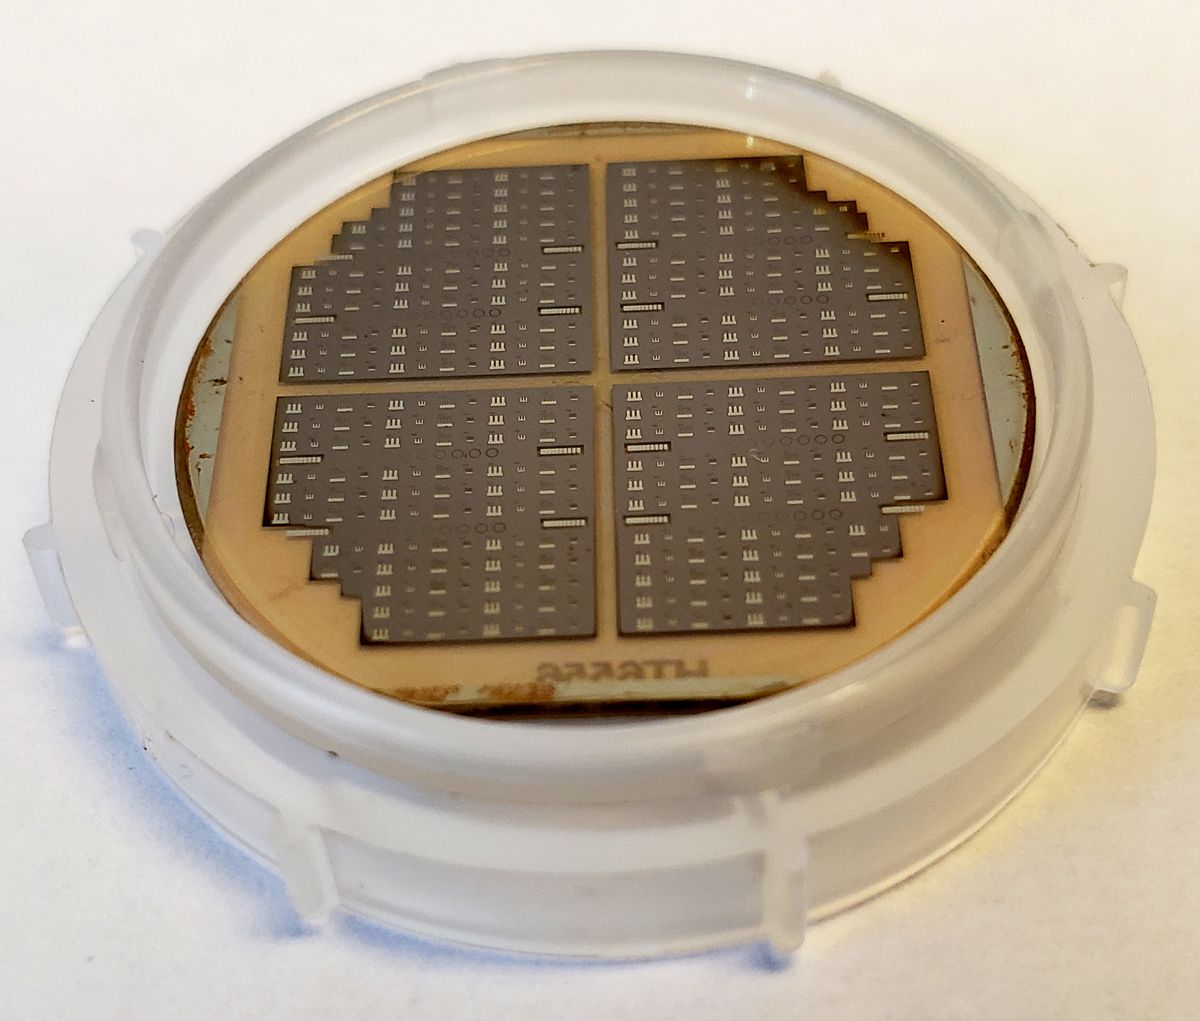 Many UV LEDs fabricated by Adroit Materials on AlN wafer from HexaTech